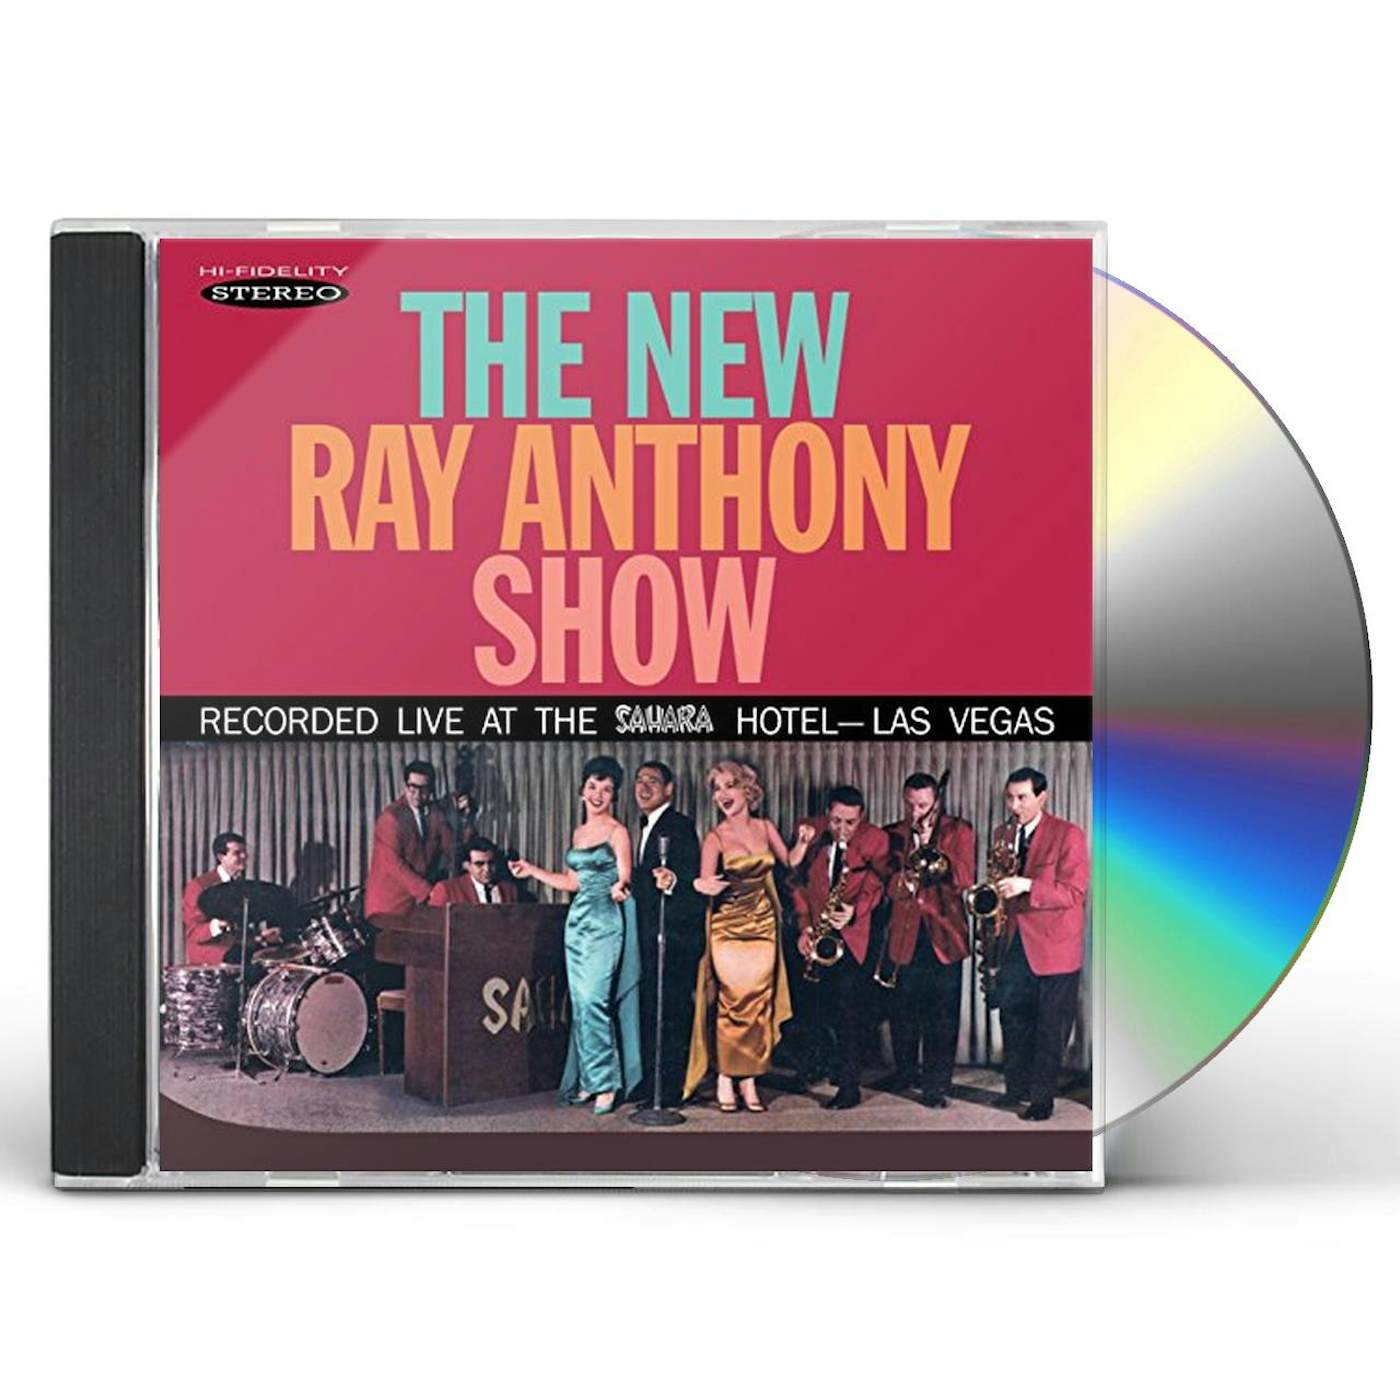 NEW RAY ANTHONY SHOW CD